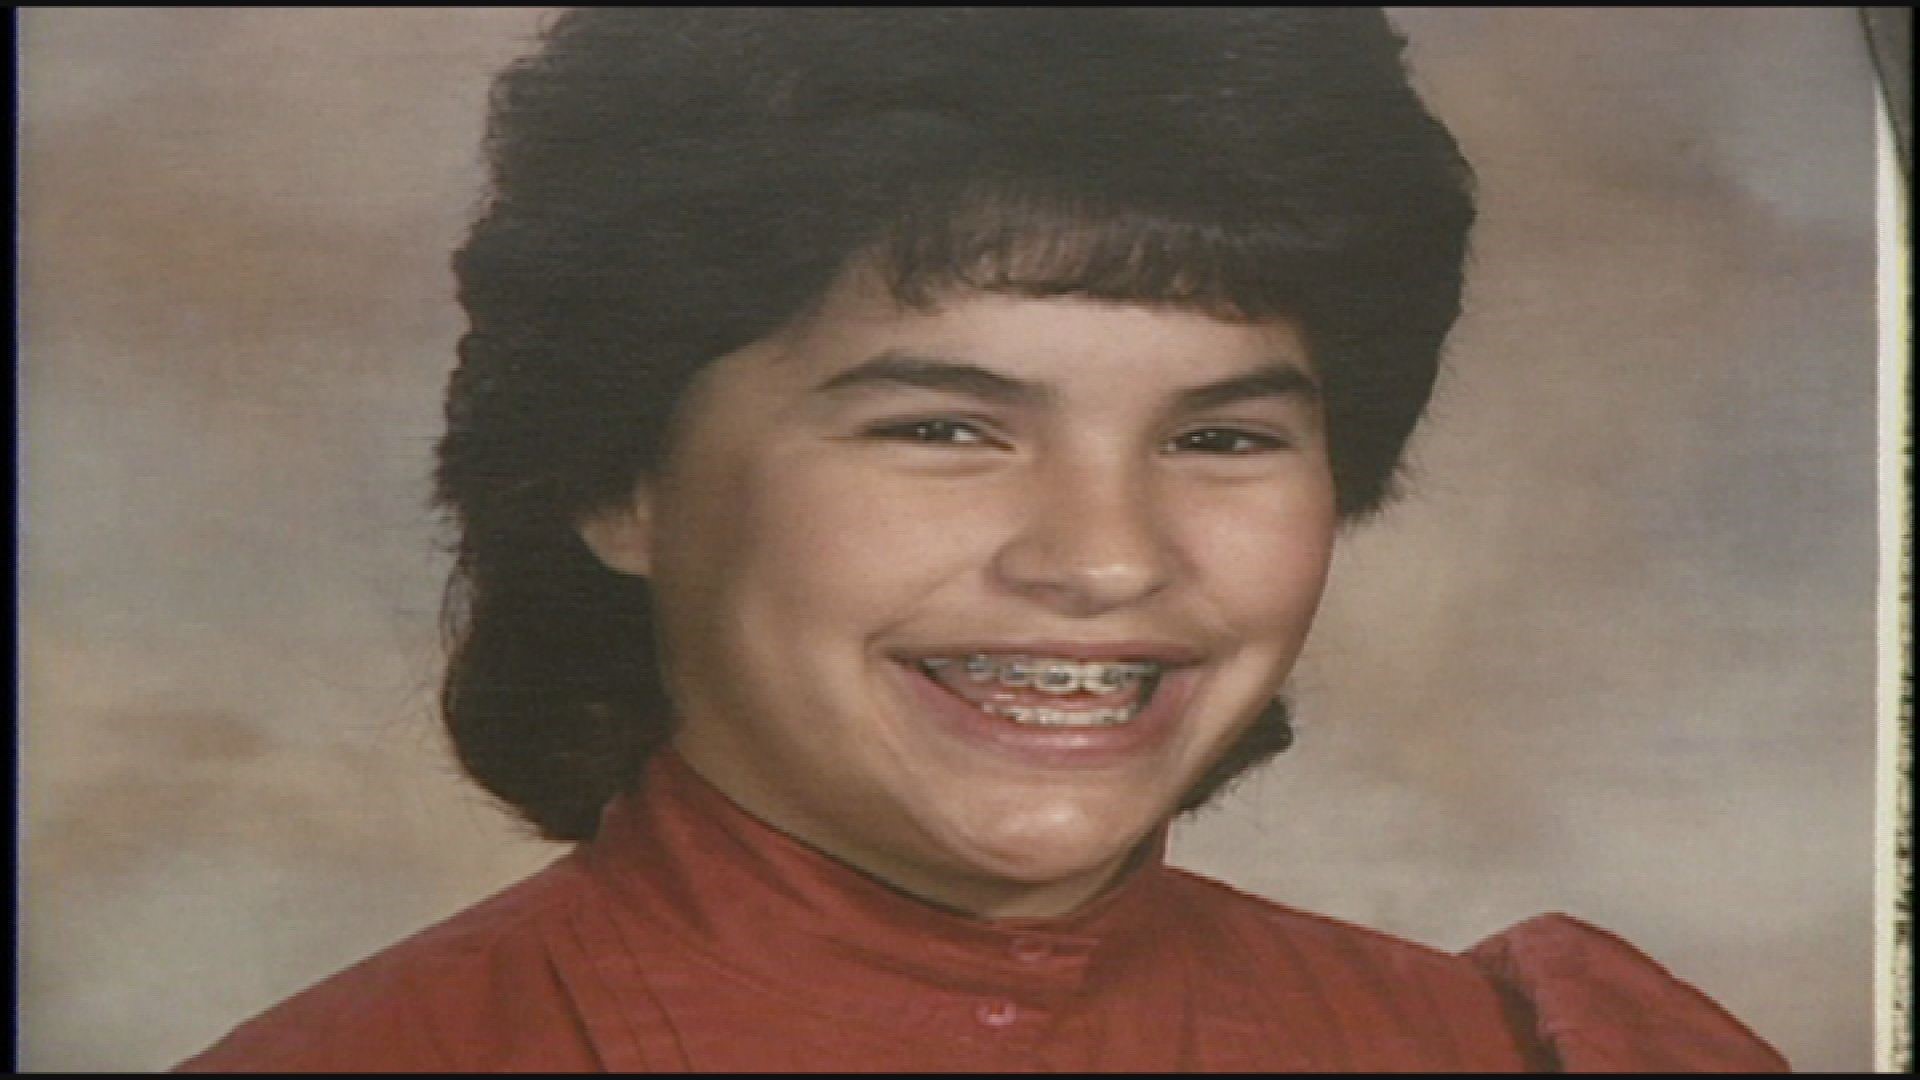 A 12-year-old girl went missing from her home in Greeley 34 years ago. This story was aired a few days before the 10th anniversary of her disappearance.